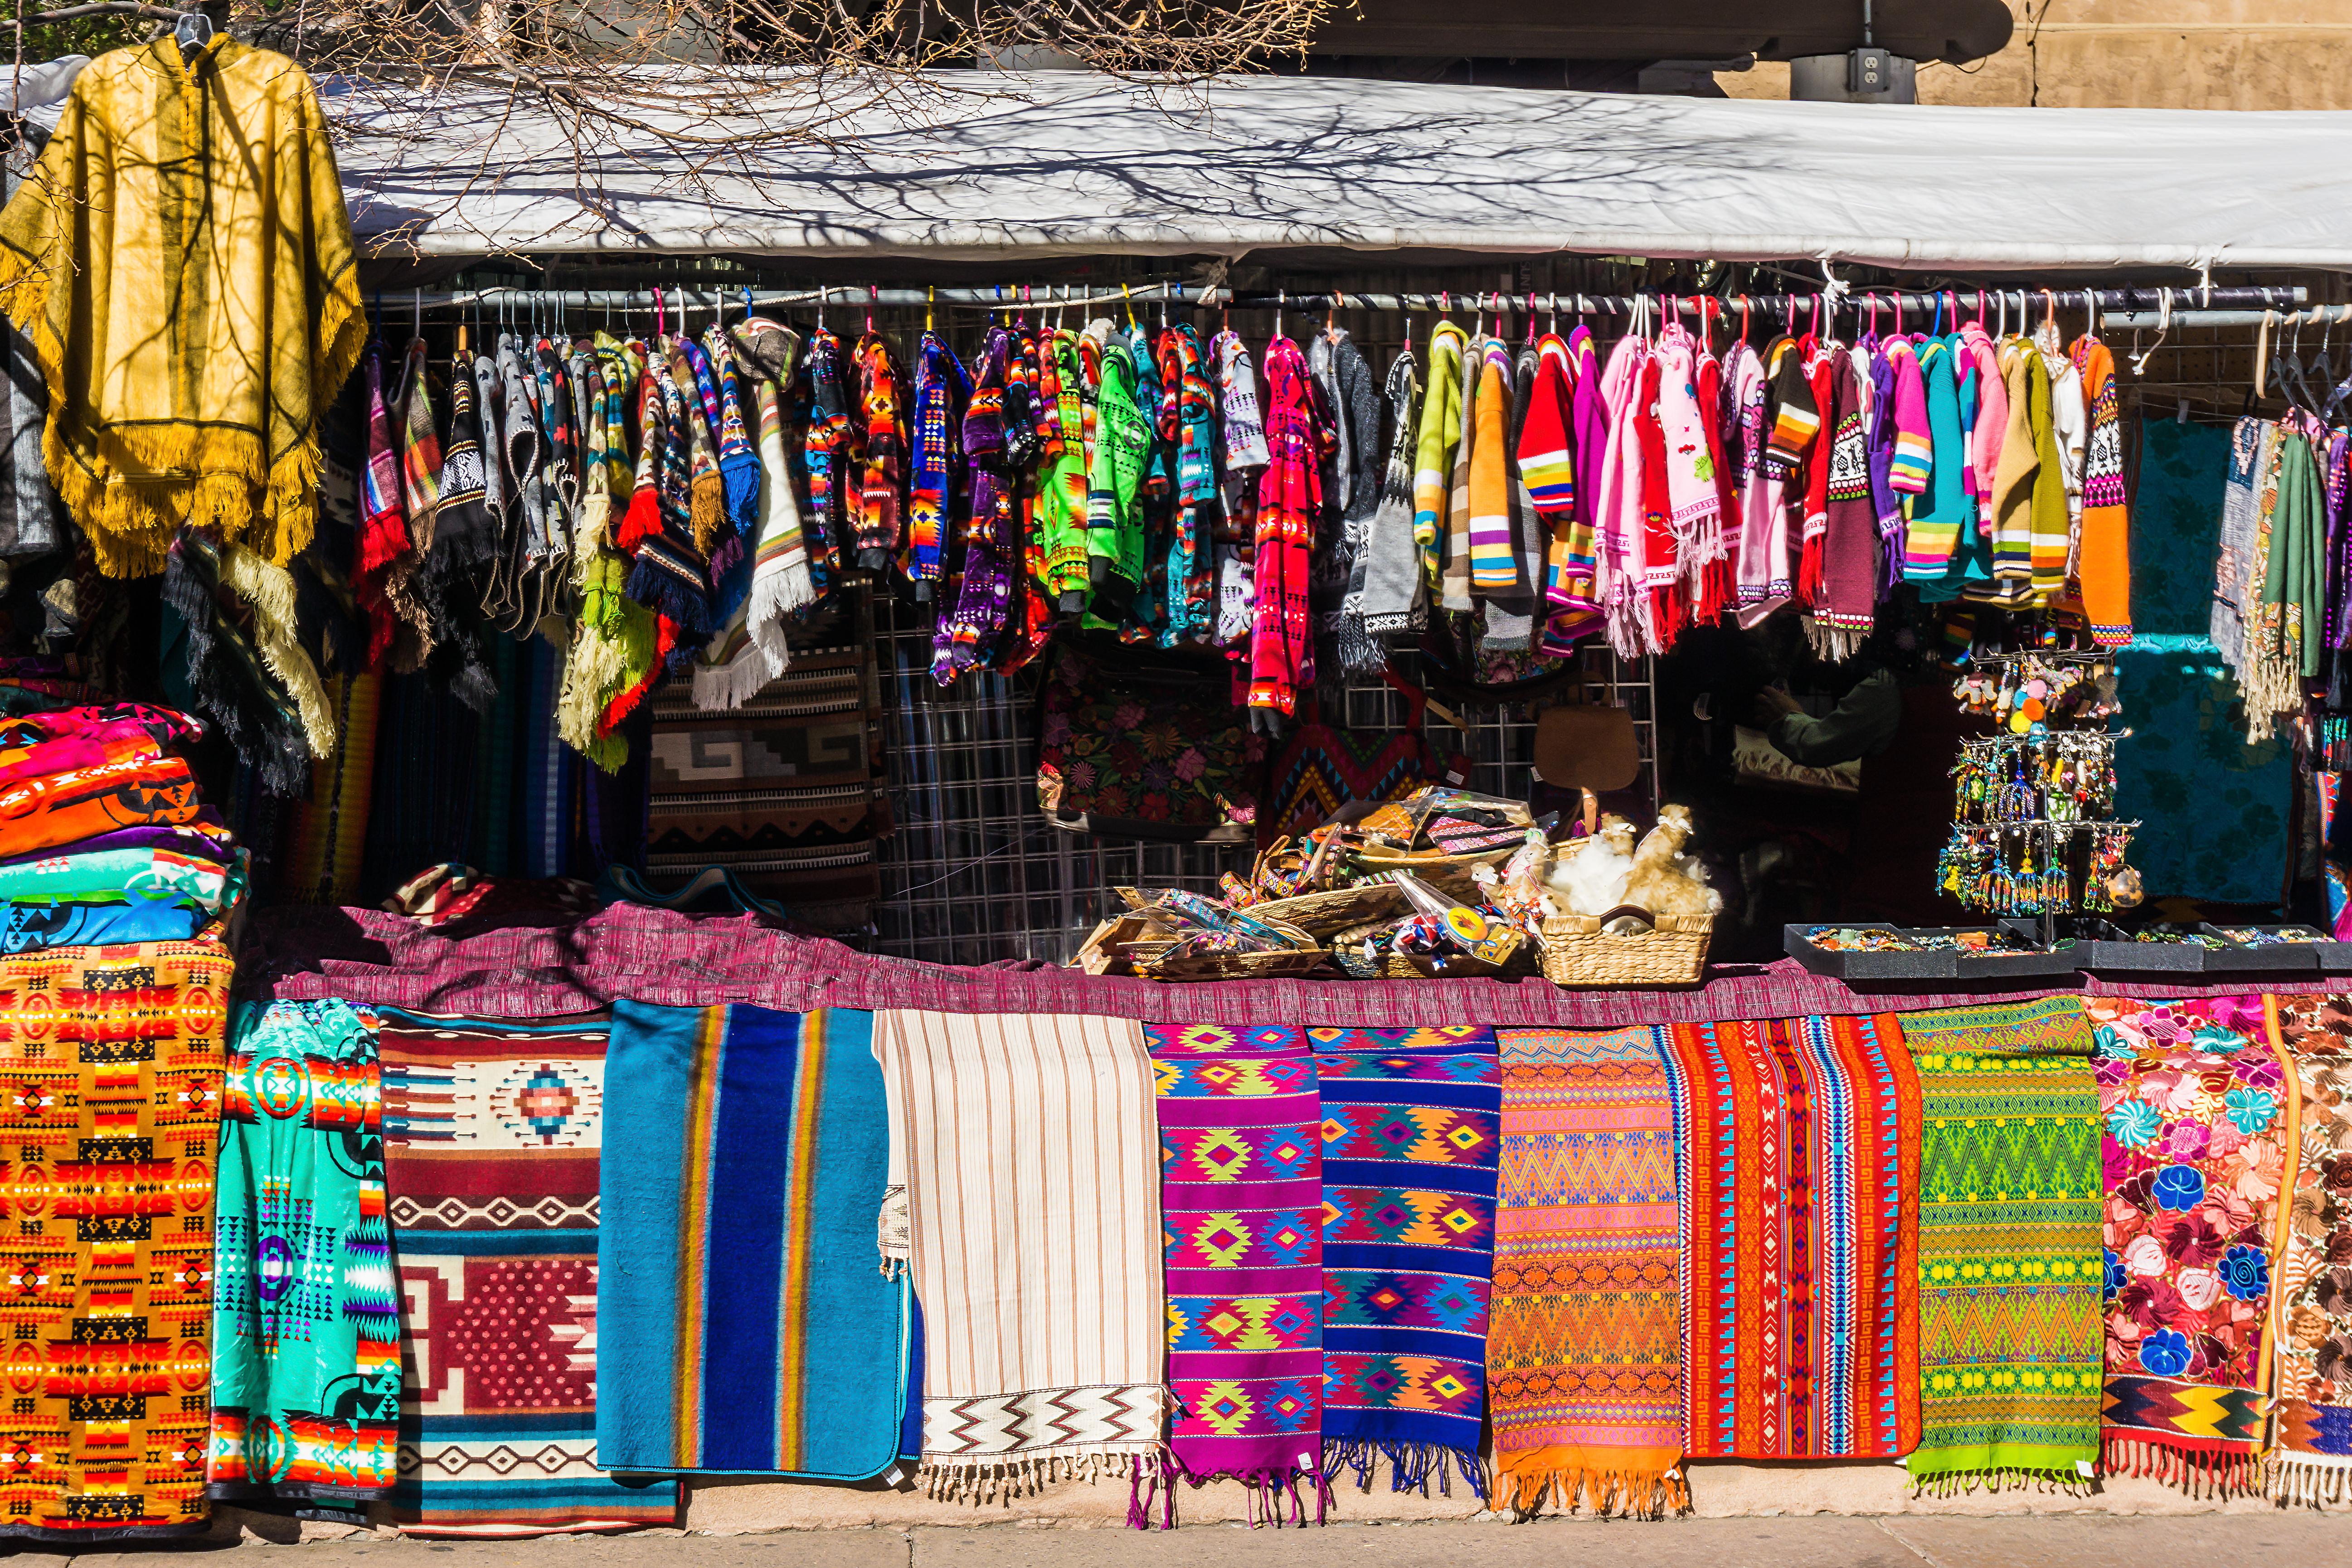 Market Scene in Santa Fe New Mexico with colorful clothes and rugs hung up